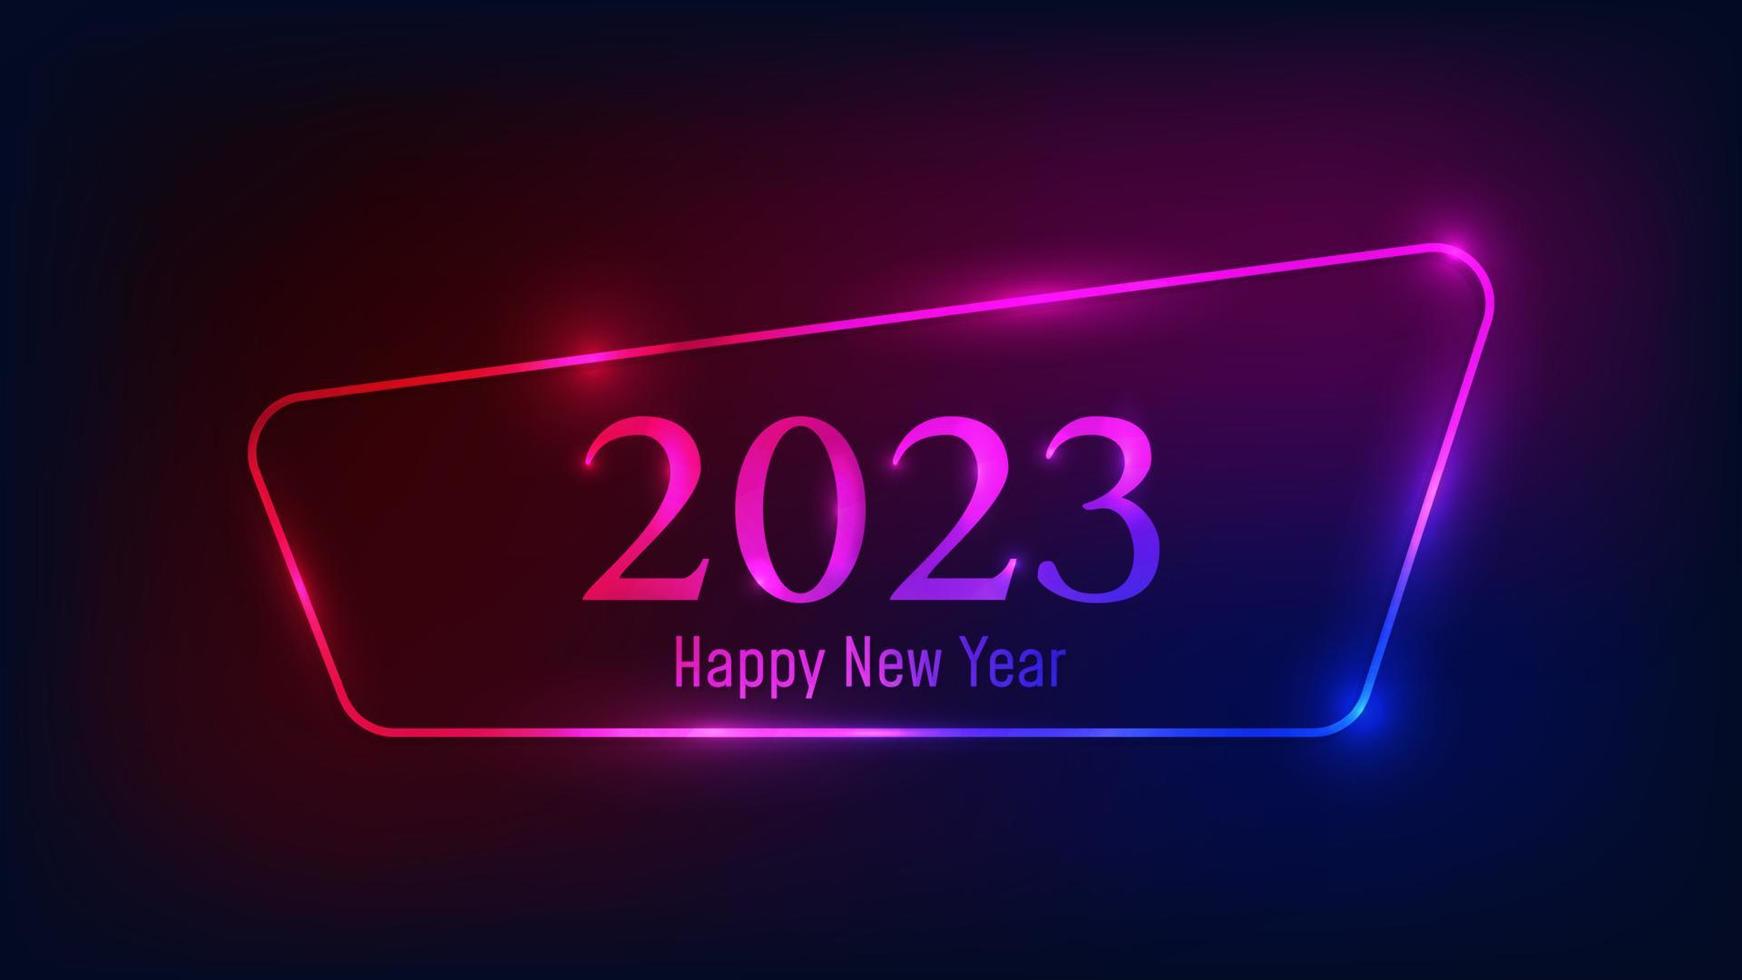 2023 Happy New Year neon background. Neon rounded frame with shining effects for Christmas holiday greeting card, flyers or posters. Vector illustration